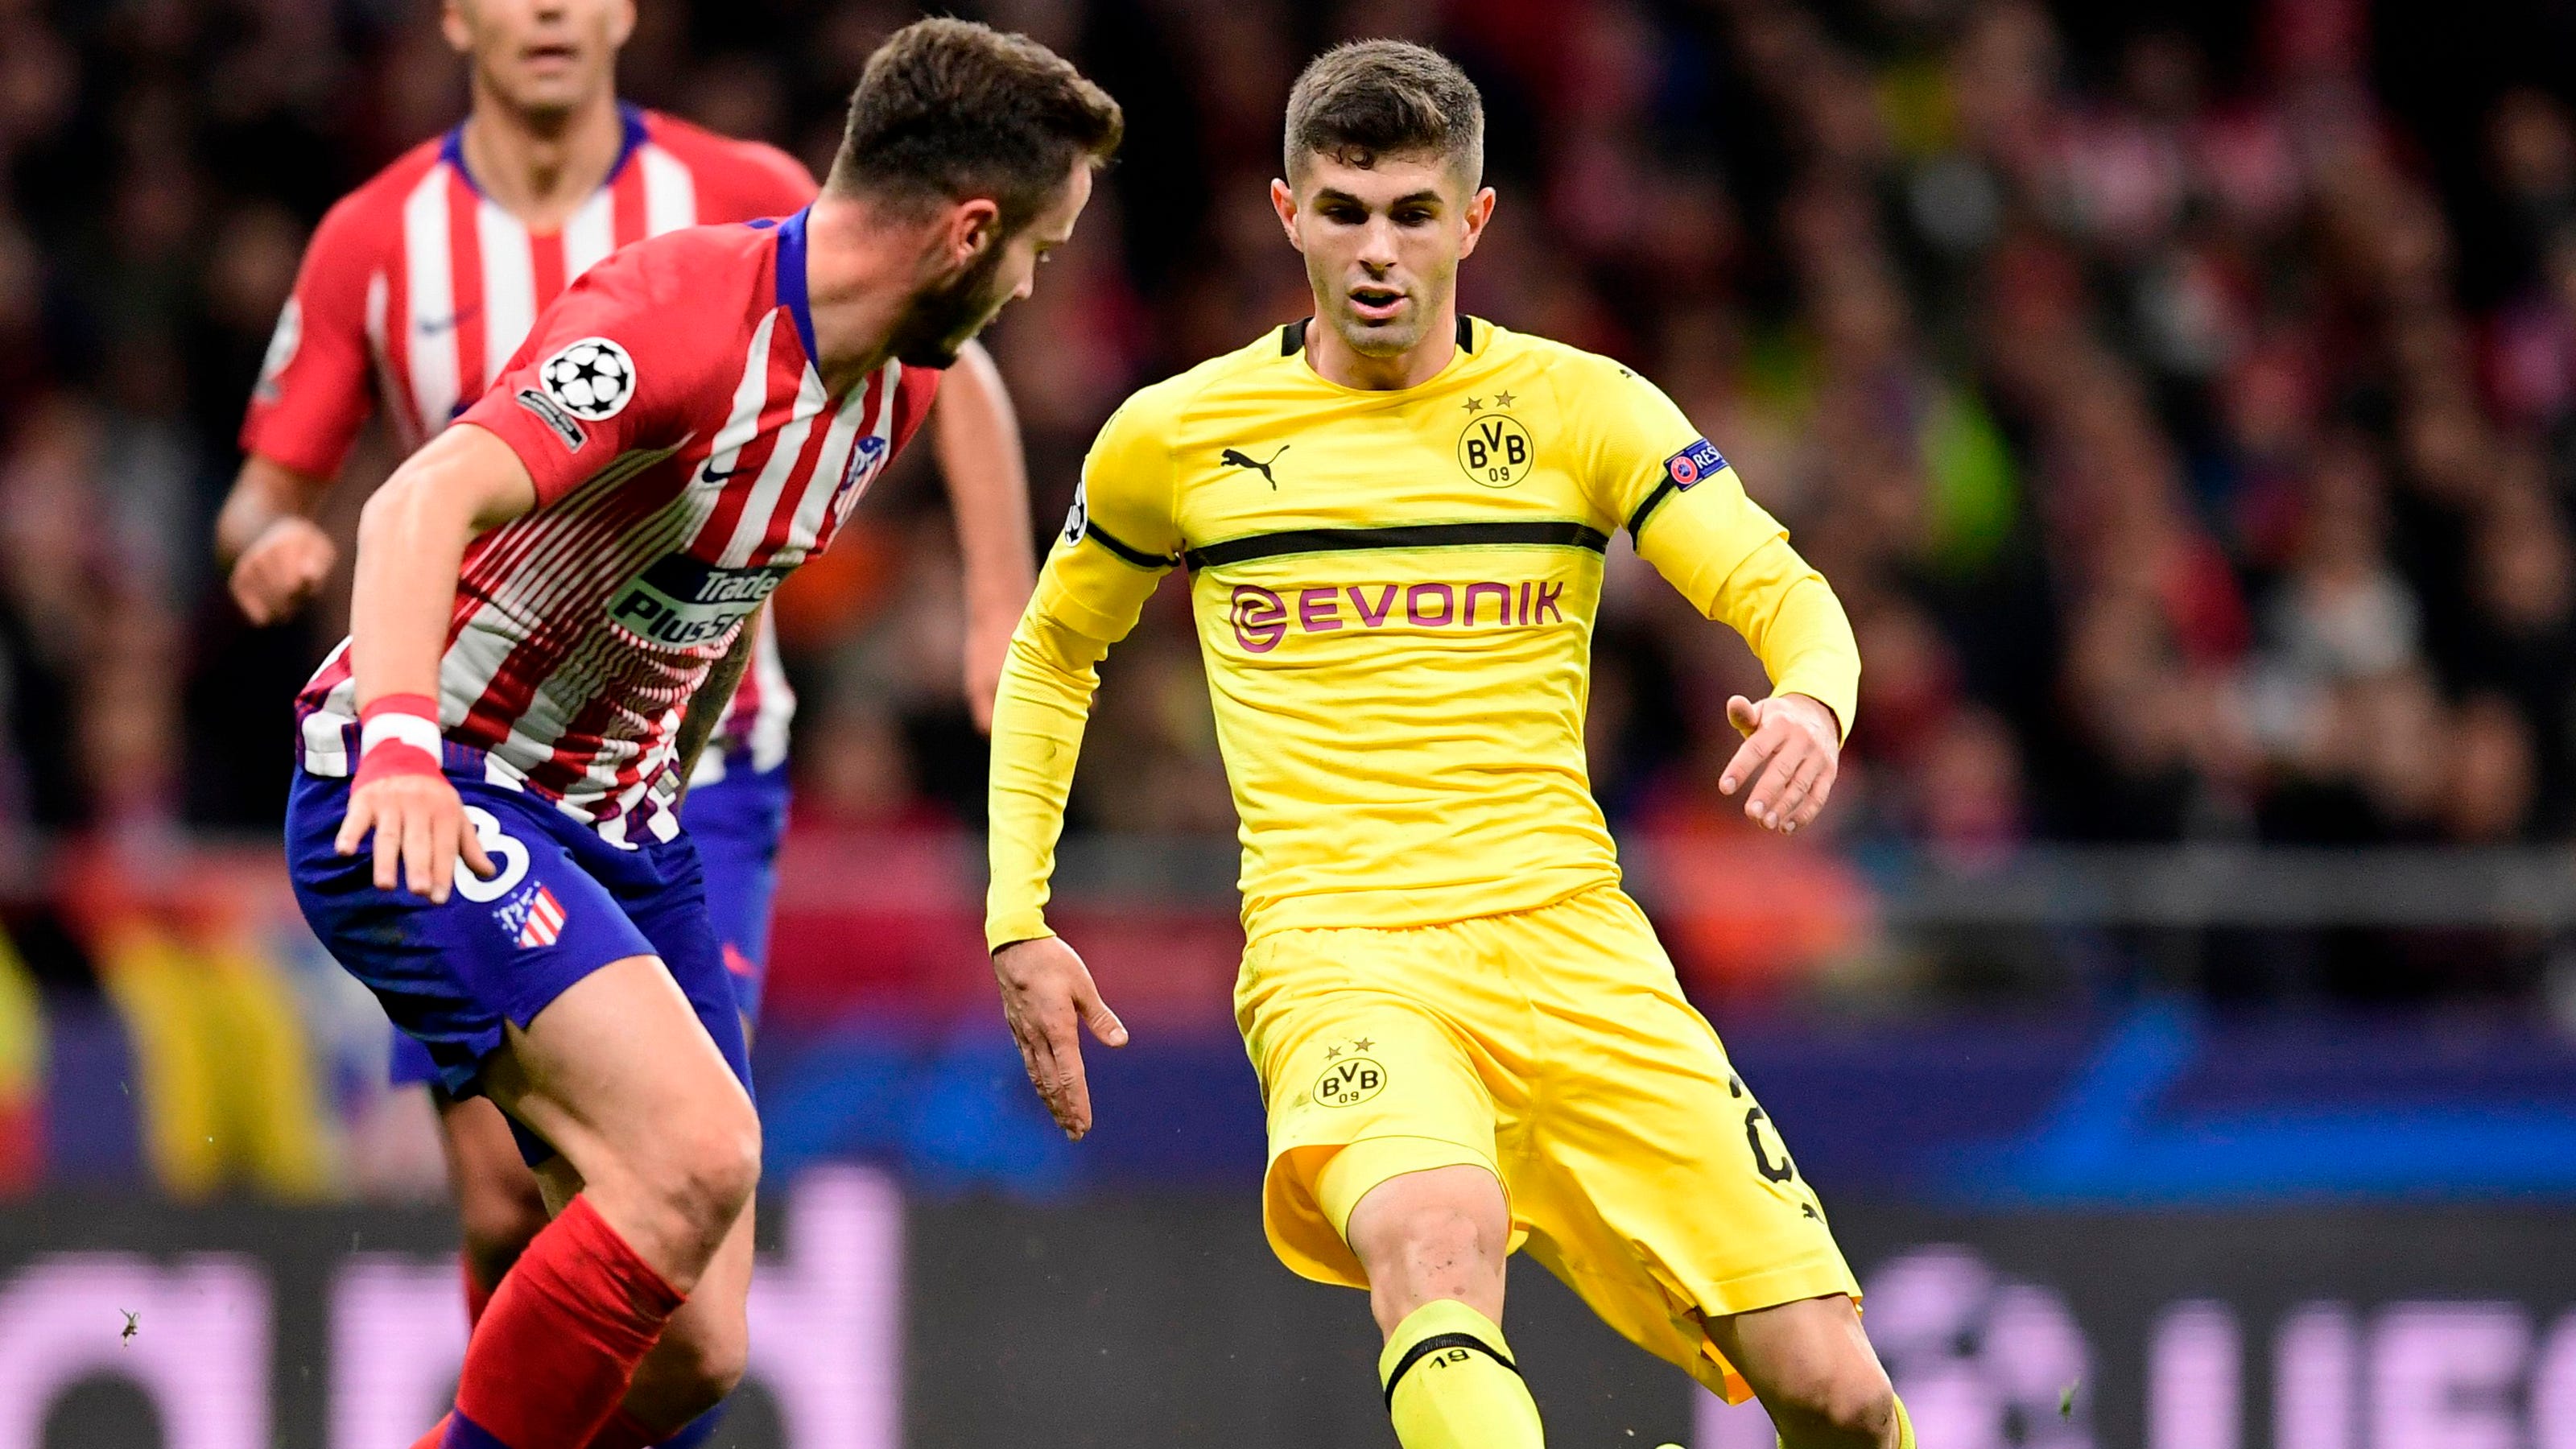 Chelsea signs Christian Pulisic; U.S. star to remain at Dortmund